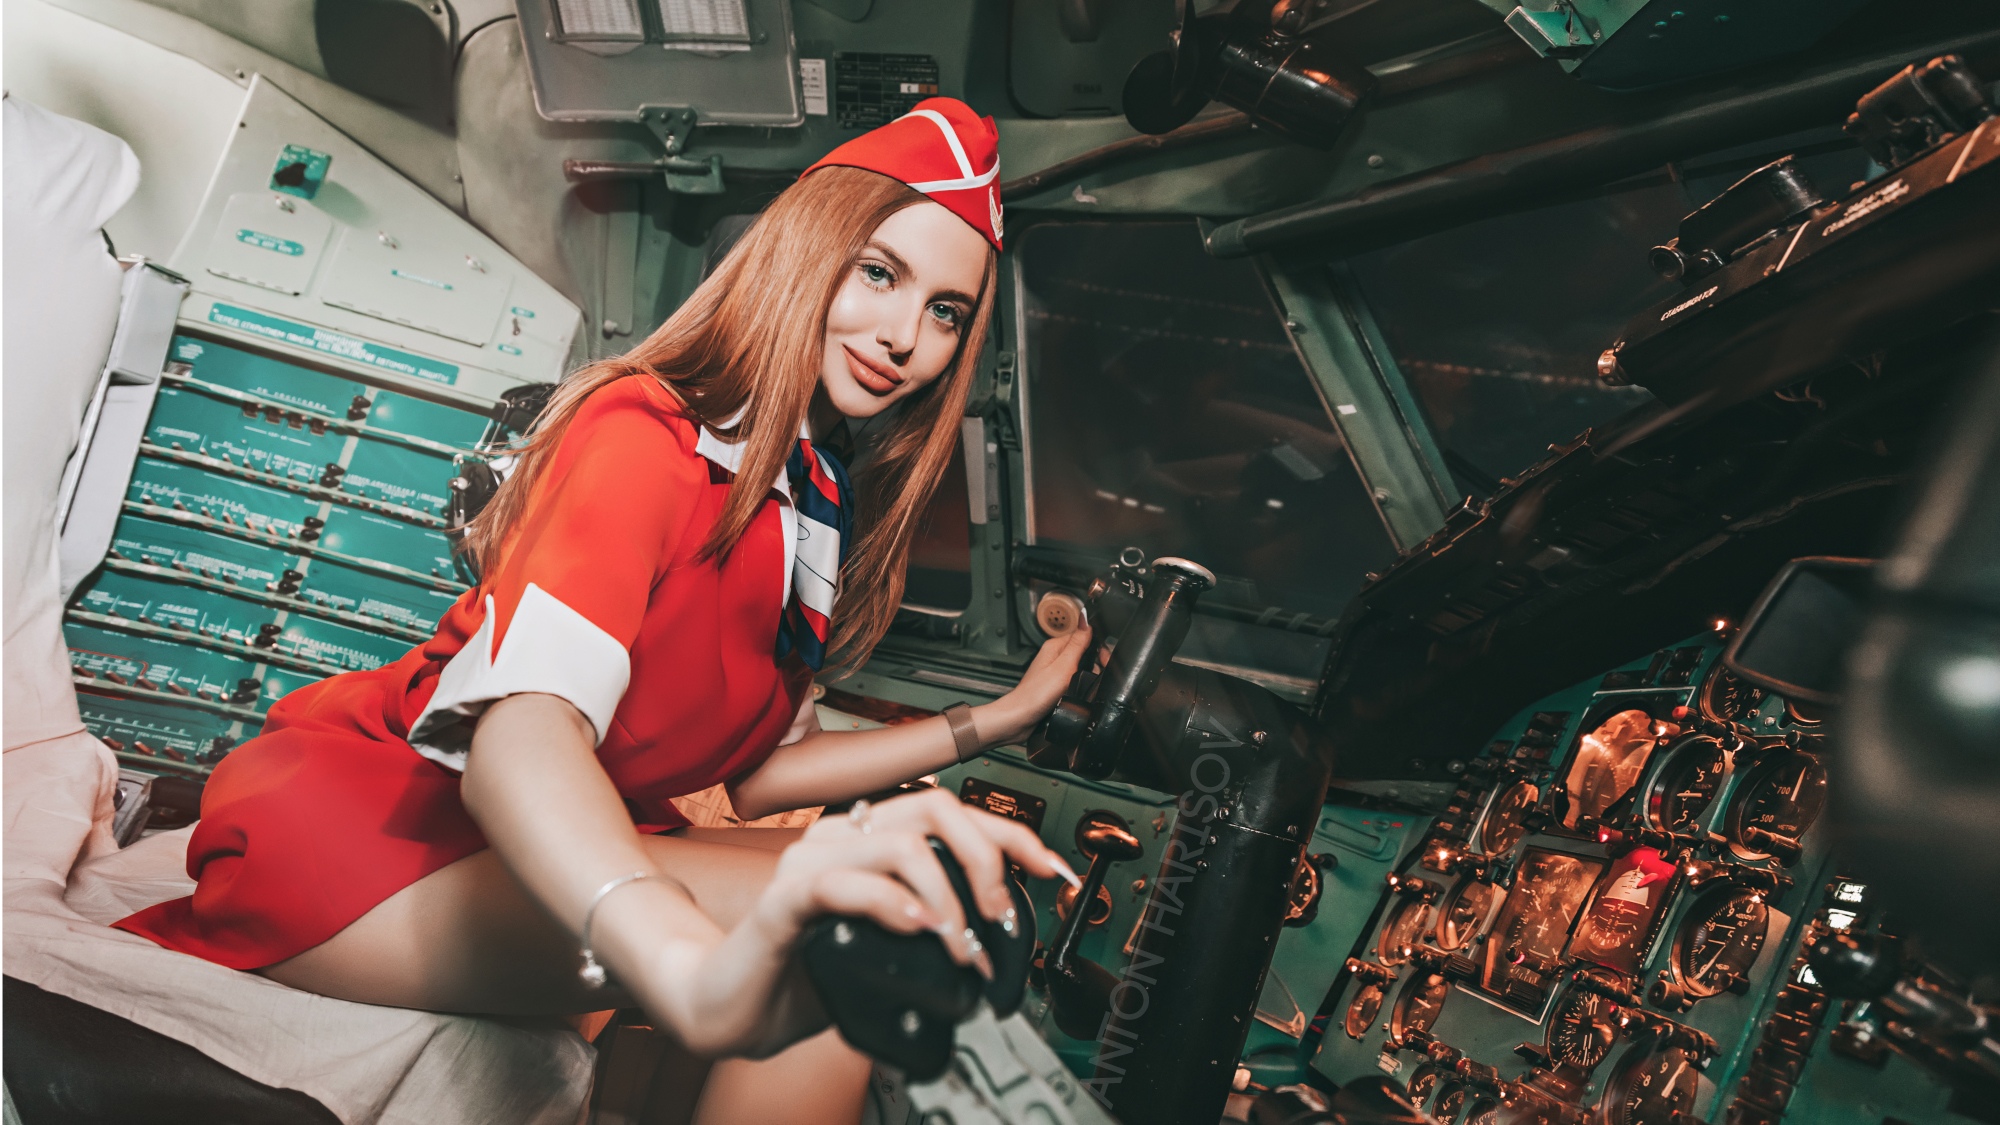 People 2000x1125 women planes brunette Anton Harisov portrait sitting smiling red dress stewardess cockpit red red lipstick women with hats vehicle women with planes long hair makeup costumes dyed hair aircraft watermarked